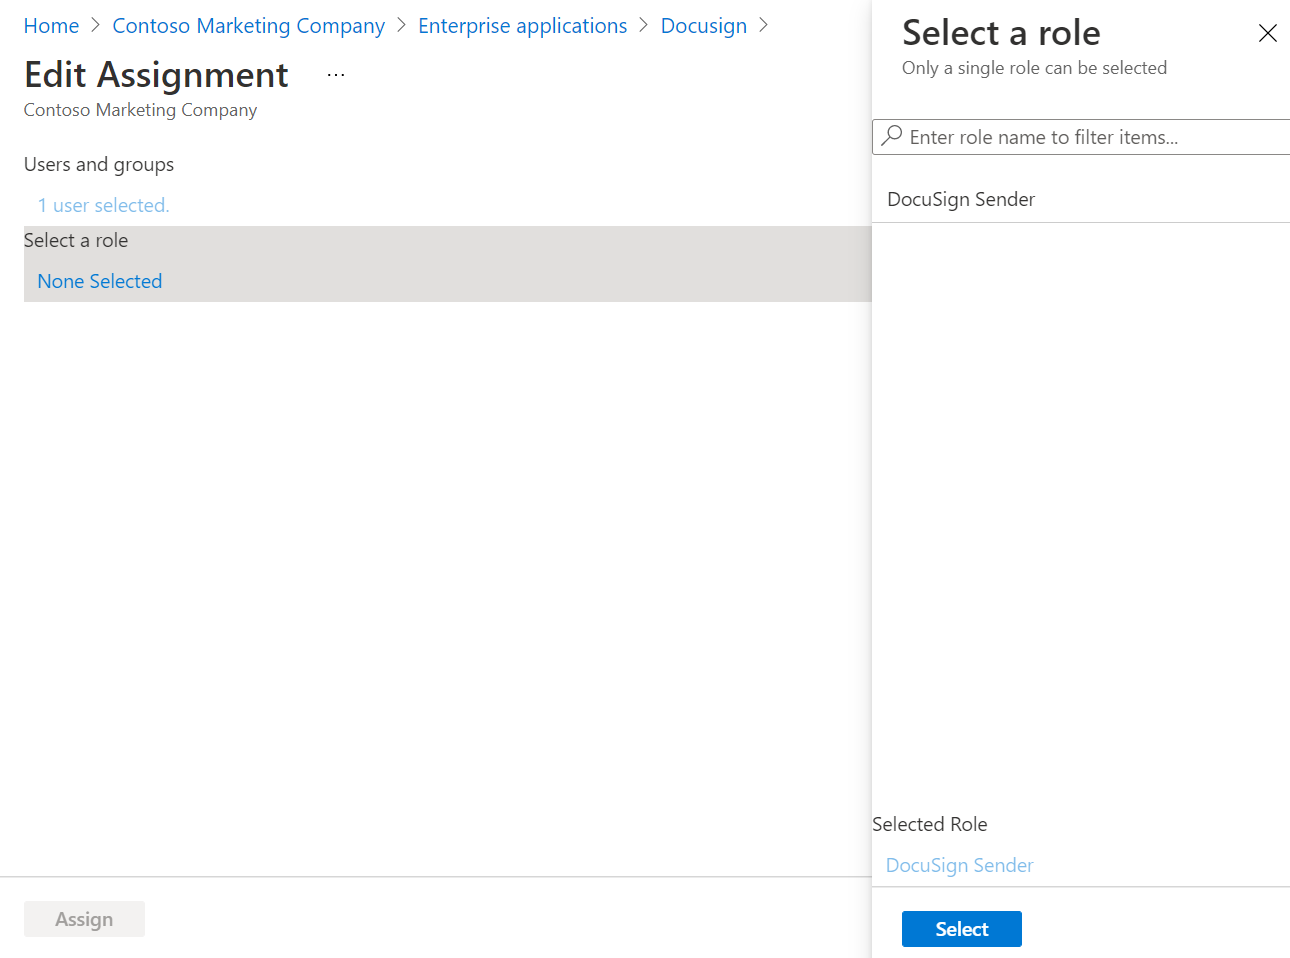 Screenshot that shows role selected for user.